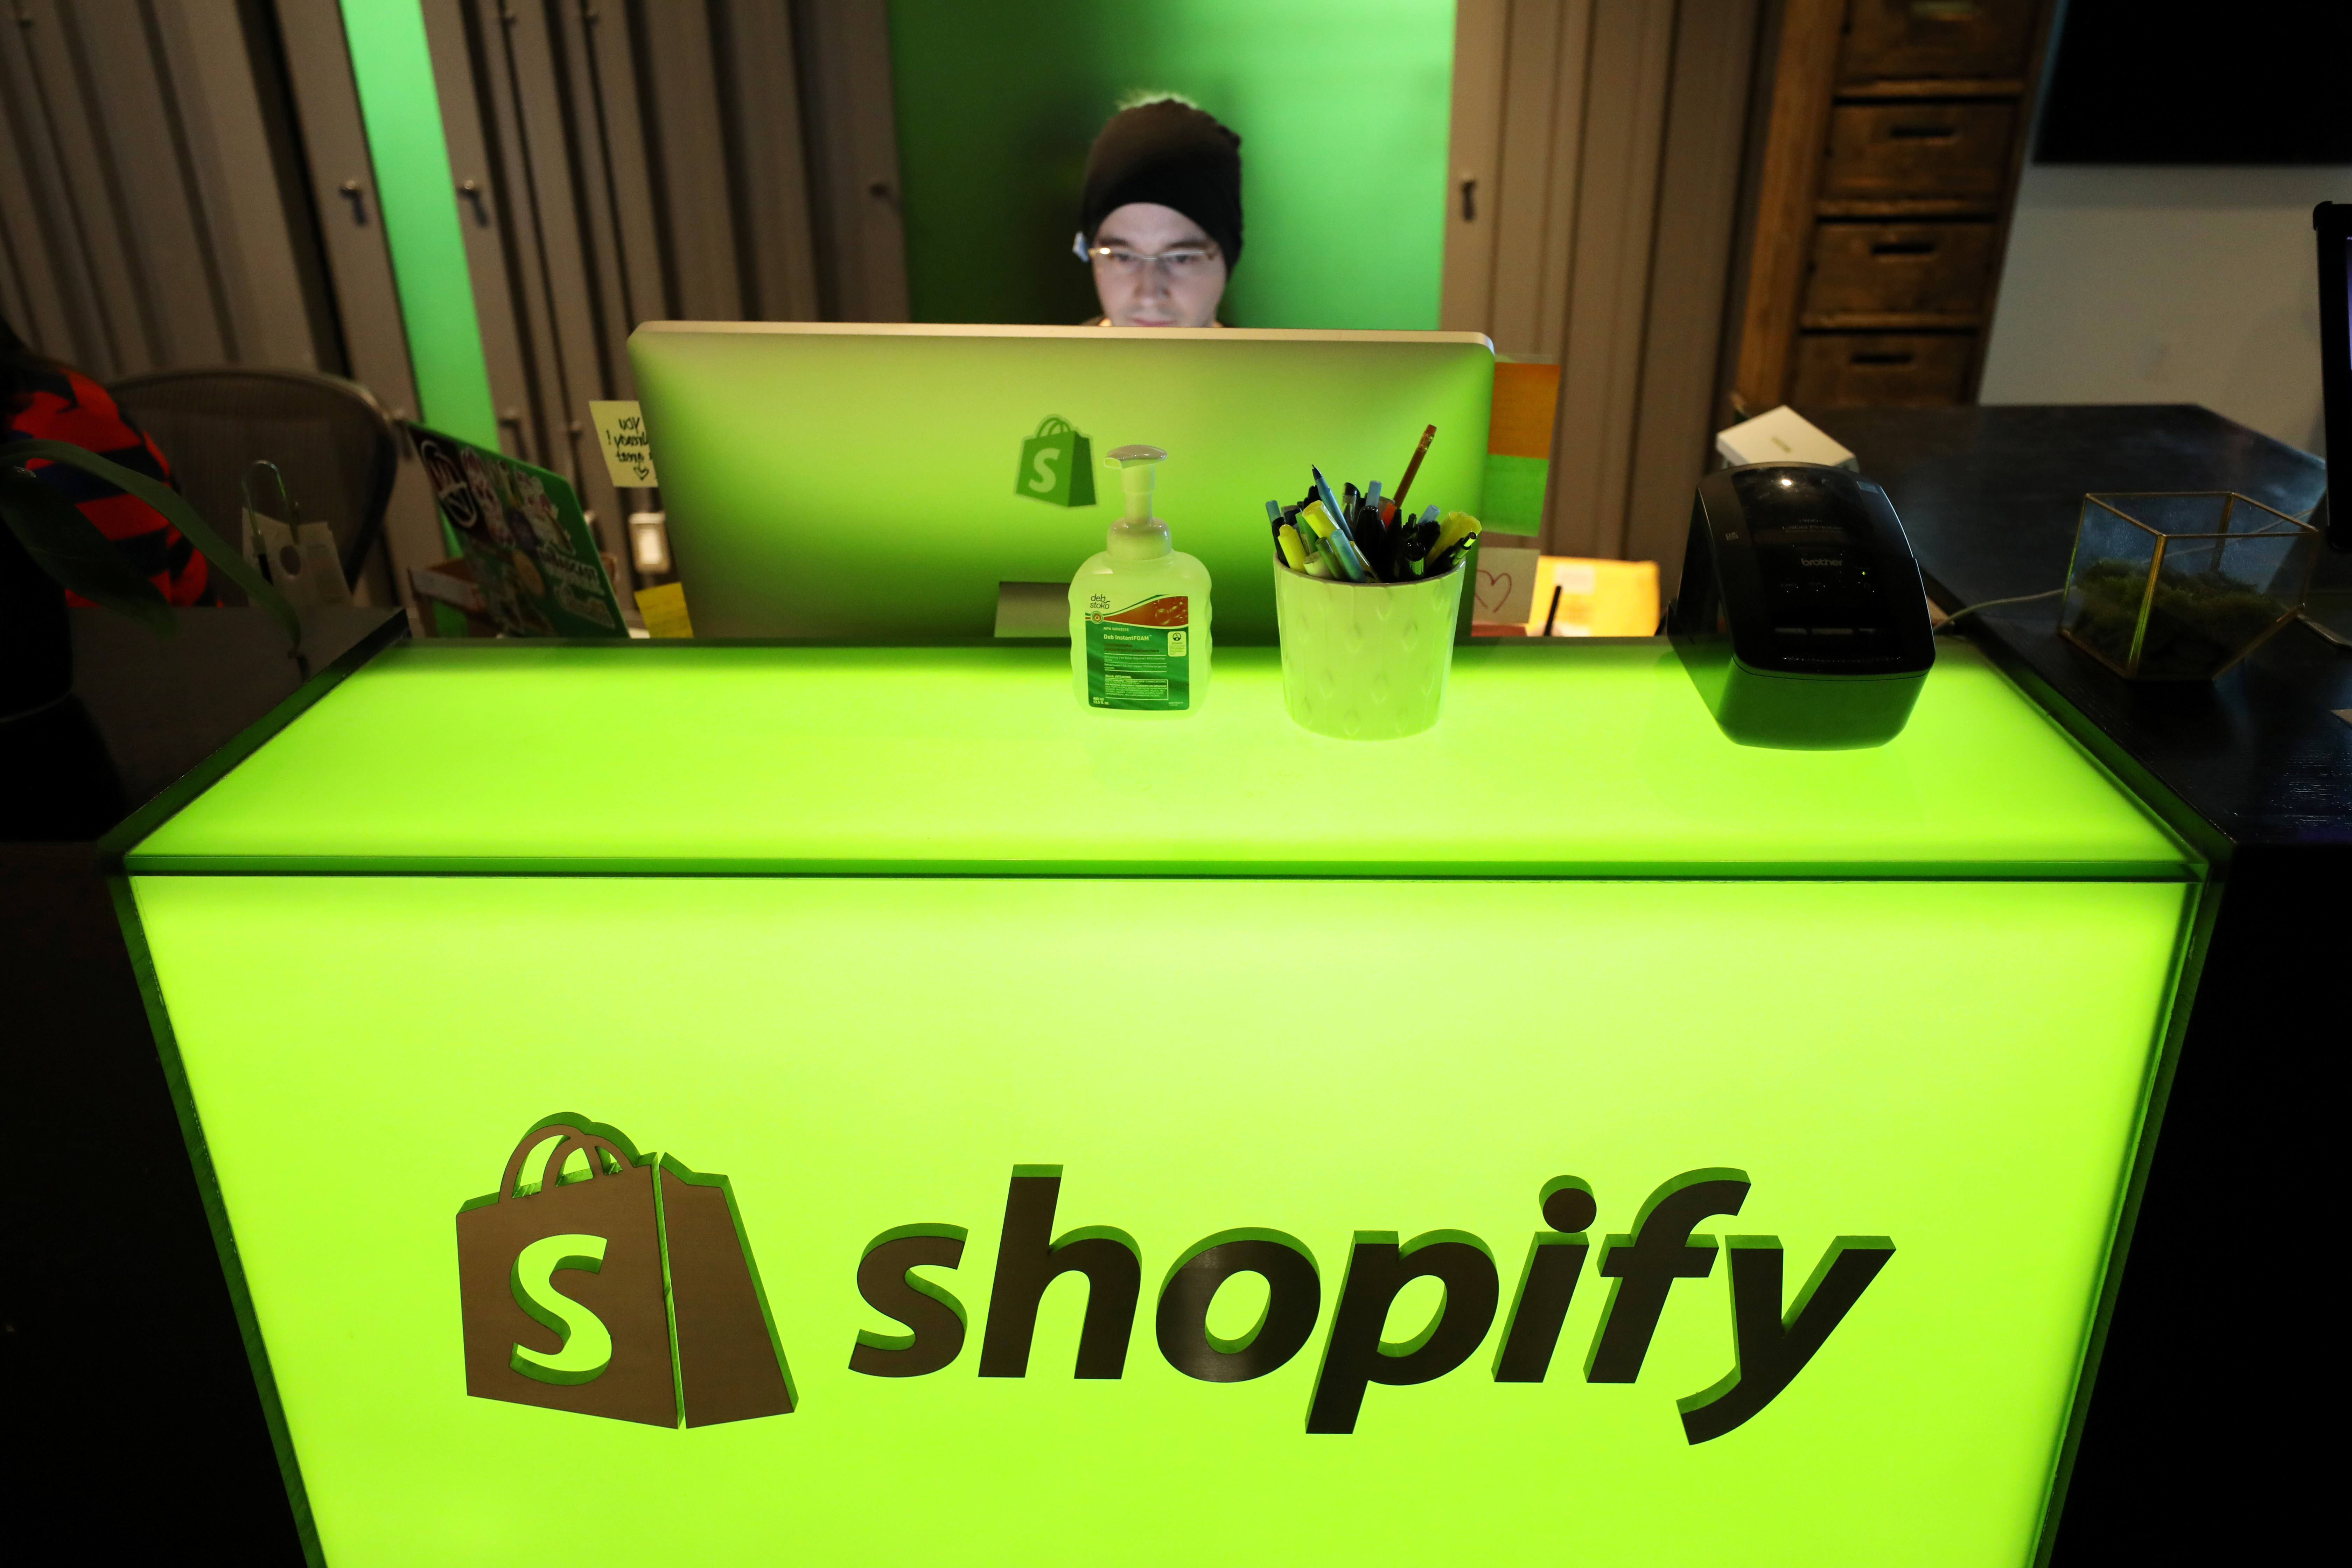 An employee works at Shopify's headquarters in Ottawa, Ontario, Canada, October 22, 2018. REUTERS/Chris Wattie" data-uuid="c94e28de-1bab-3636-9170-a3052663b263